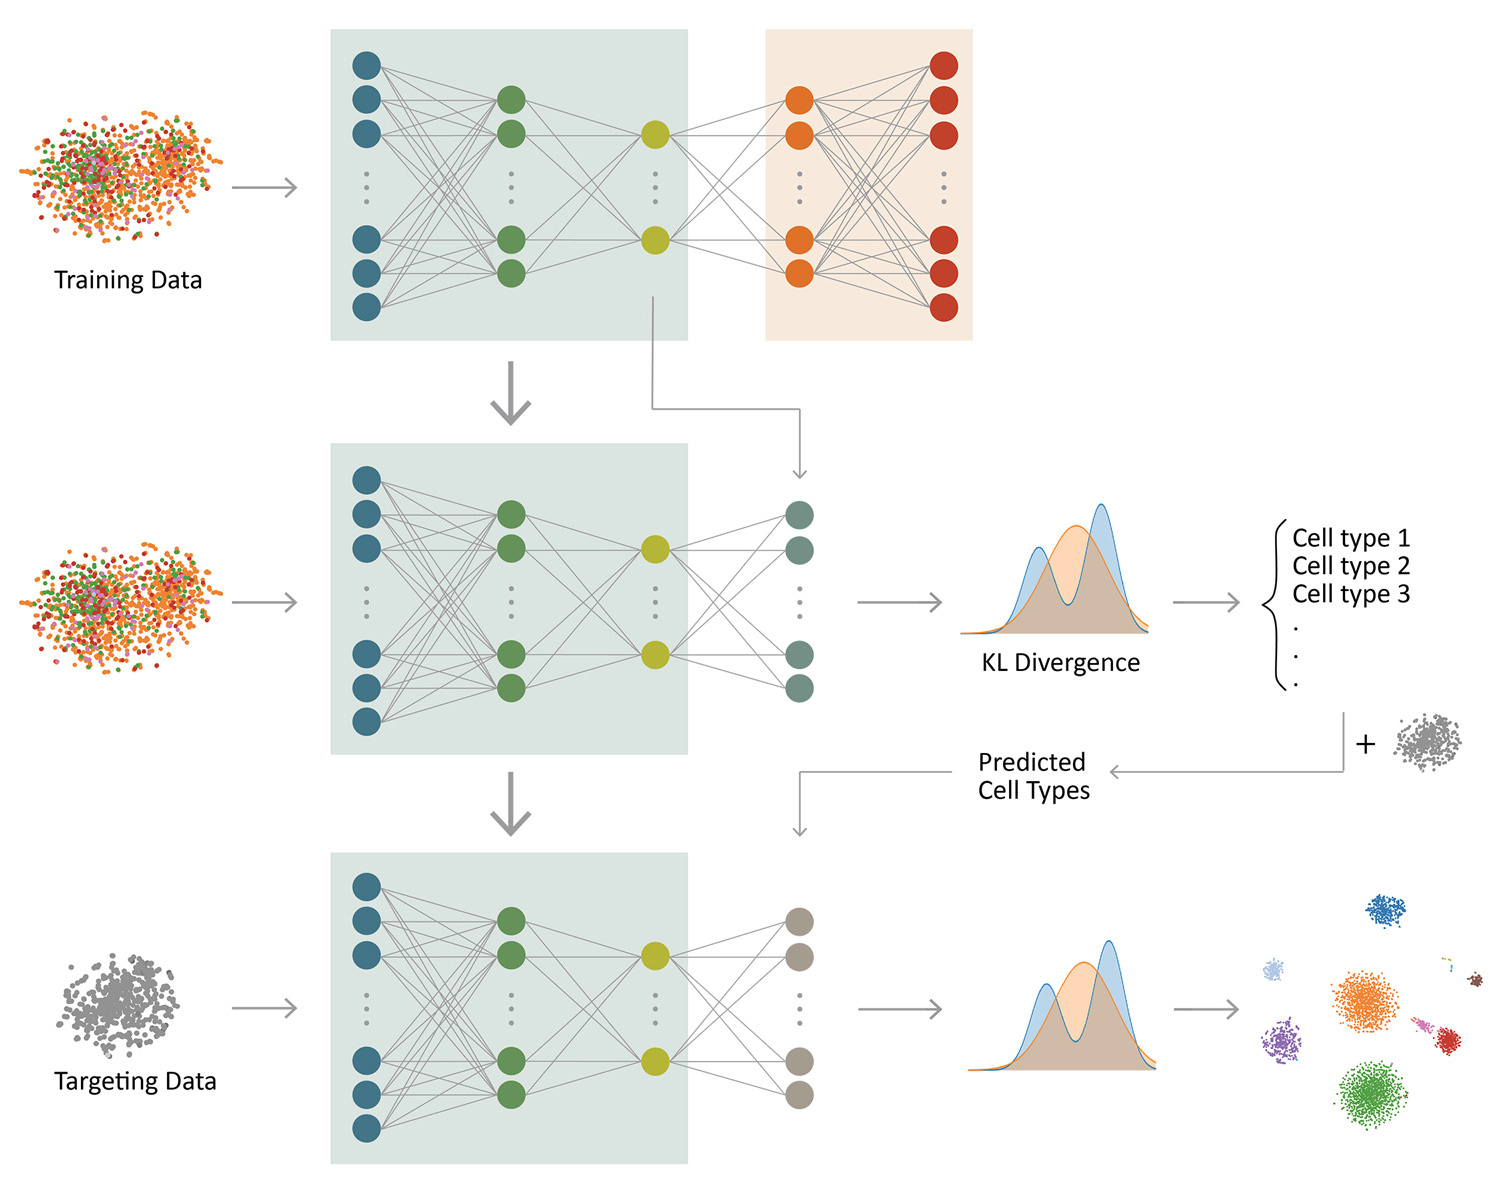 Iterative transfer learning with neural network for clustering and cell type classification in single-cell RNA-seq analysis